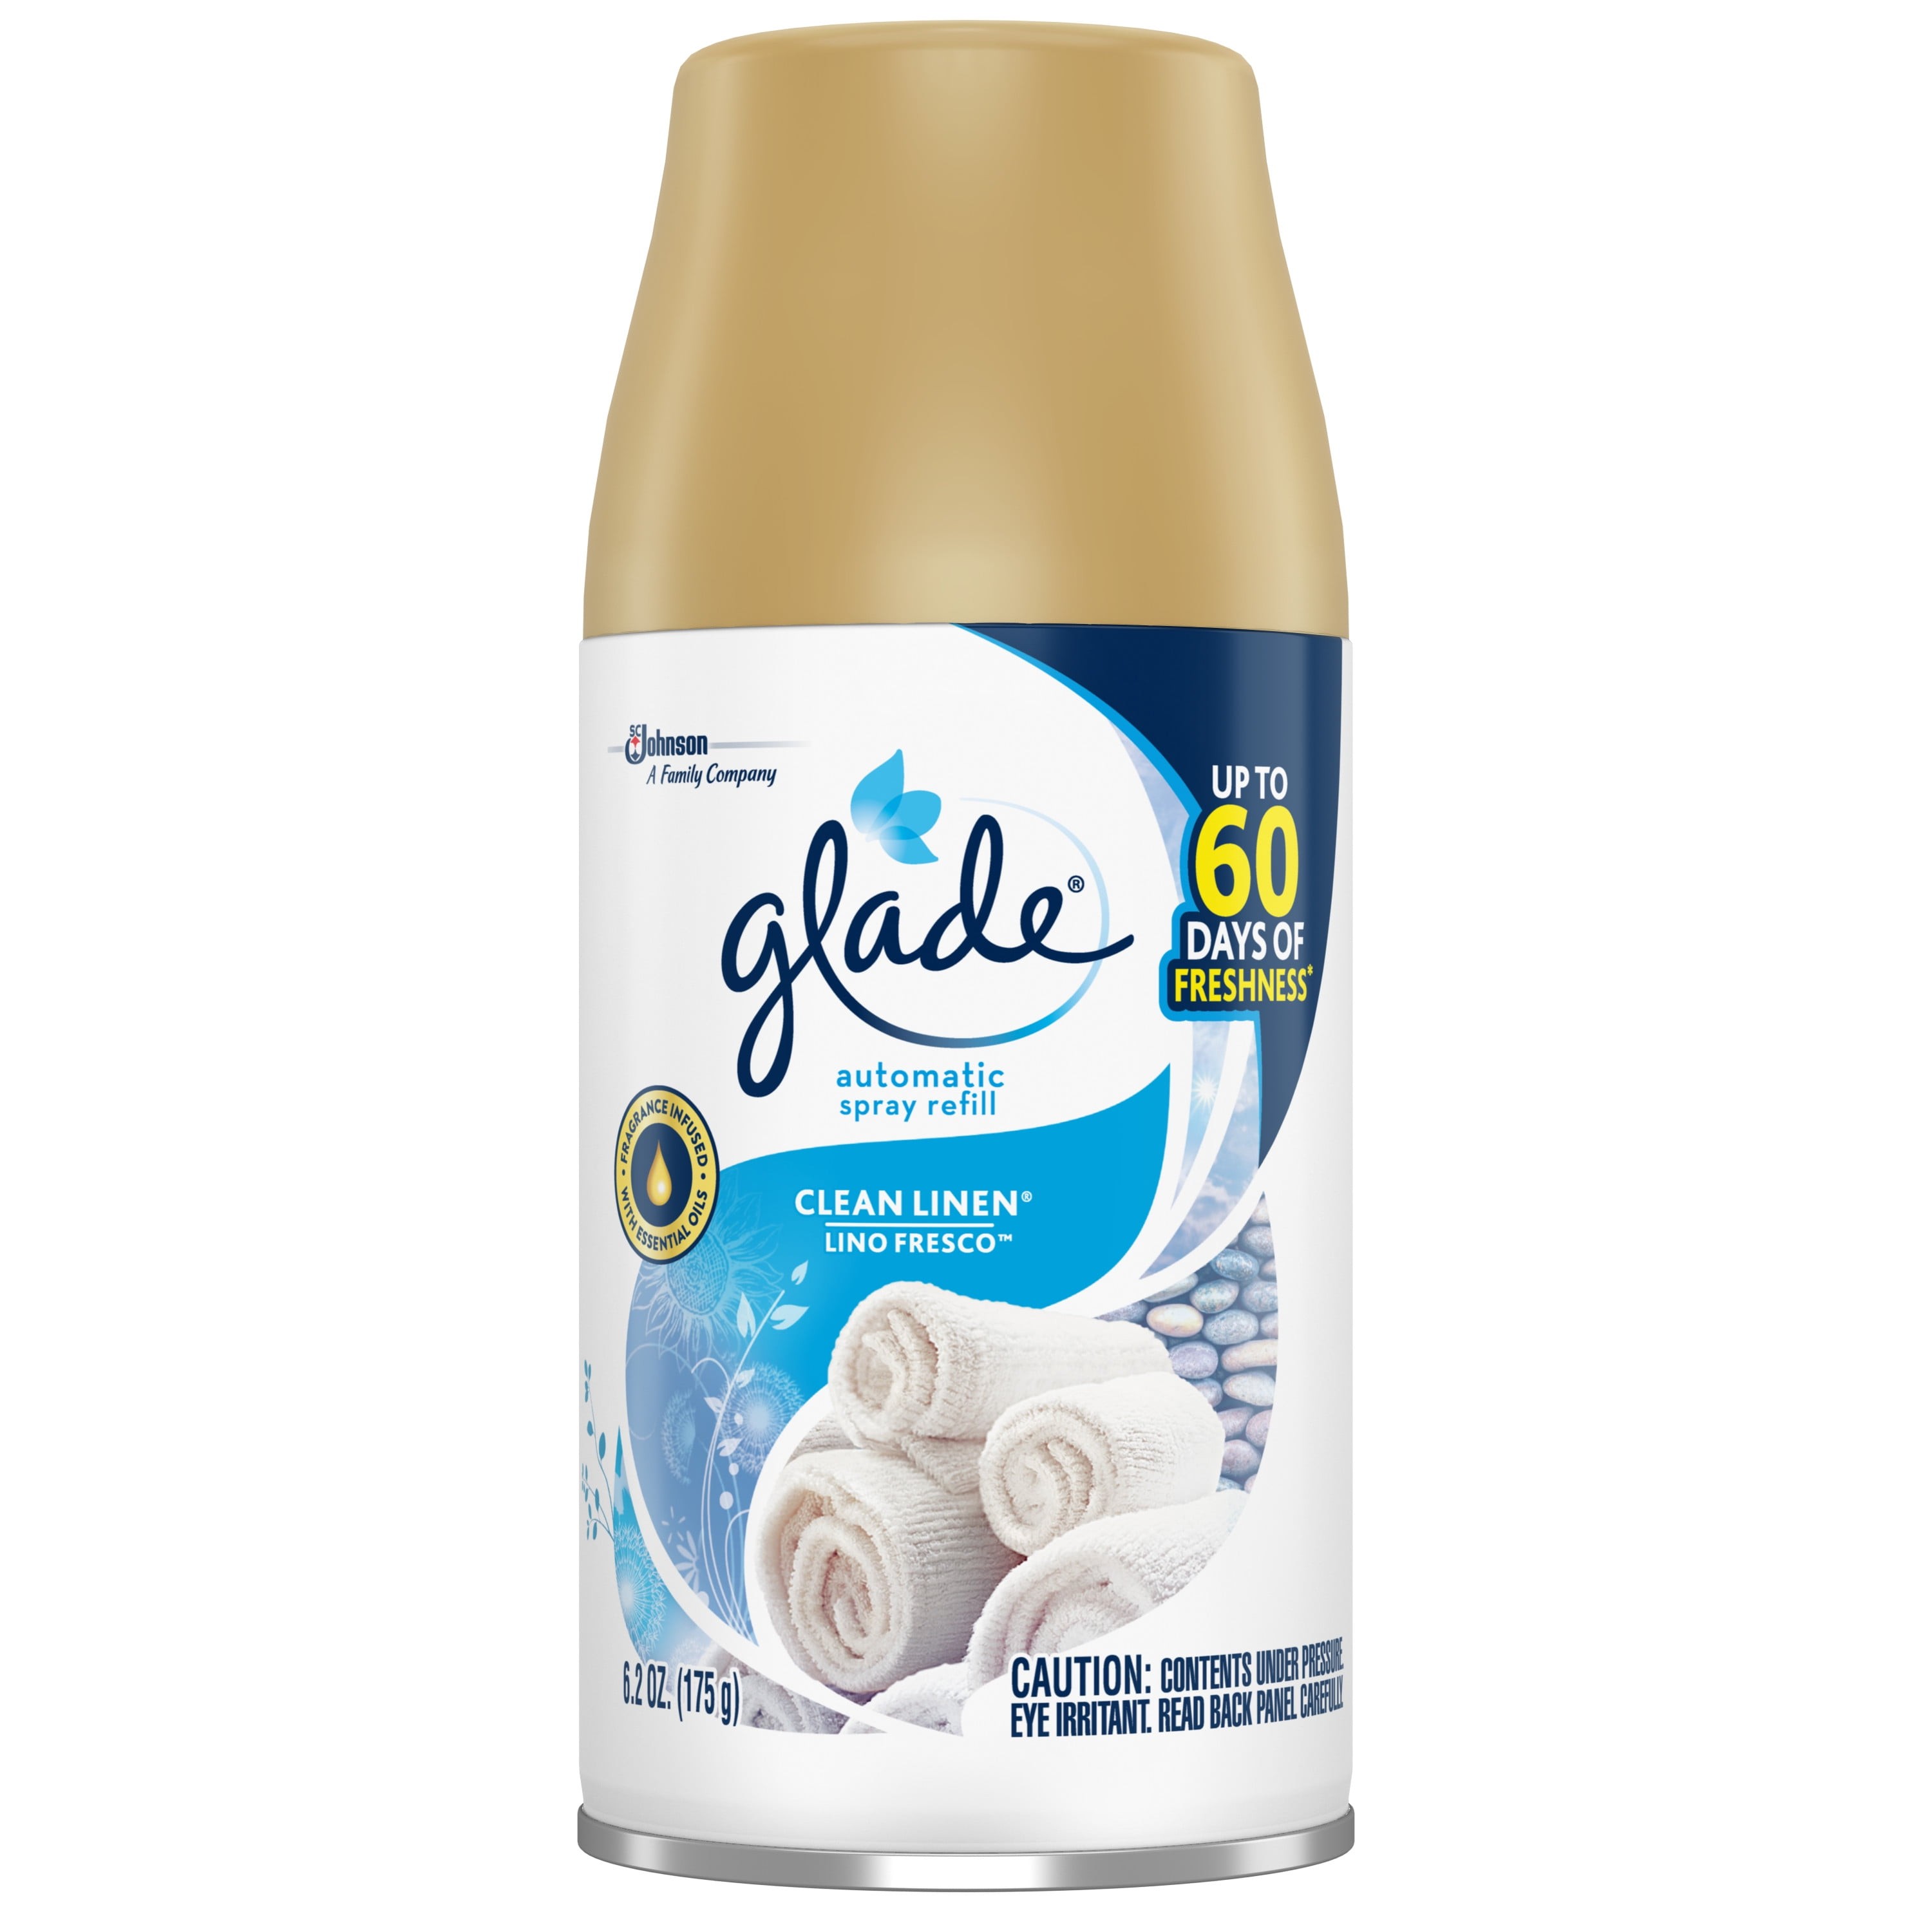 Glade PlugIns Refill 2 ct, Clean Linen, 1.34 FL. oz. Total, Scented Oil Air  Freshener Infused with Essential Oils